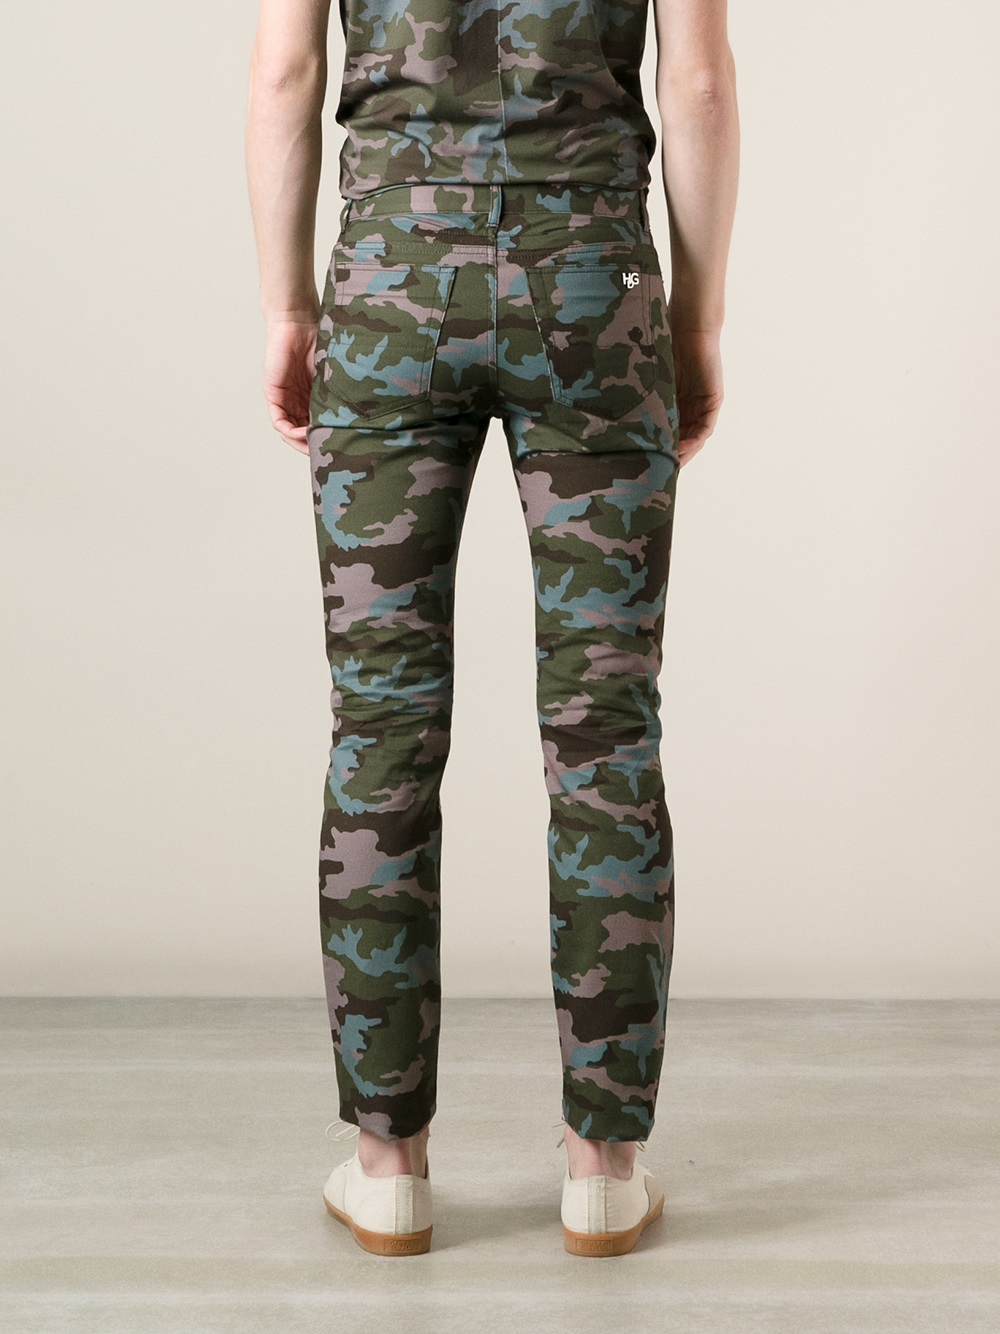 Givenchy Camo and Floral Print Trousers for Men - Lyst